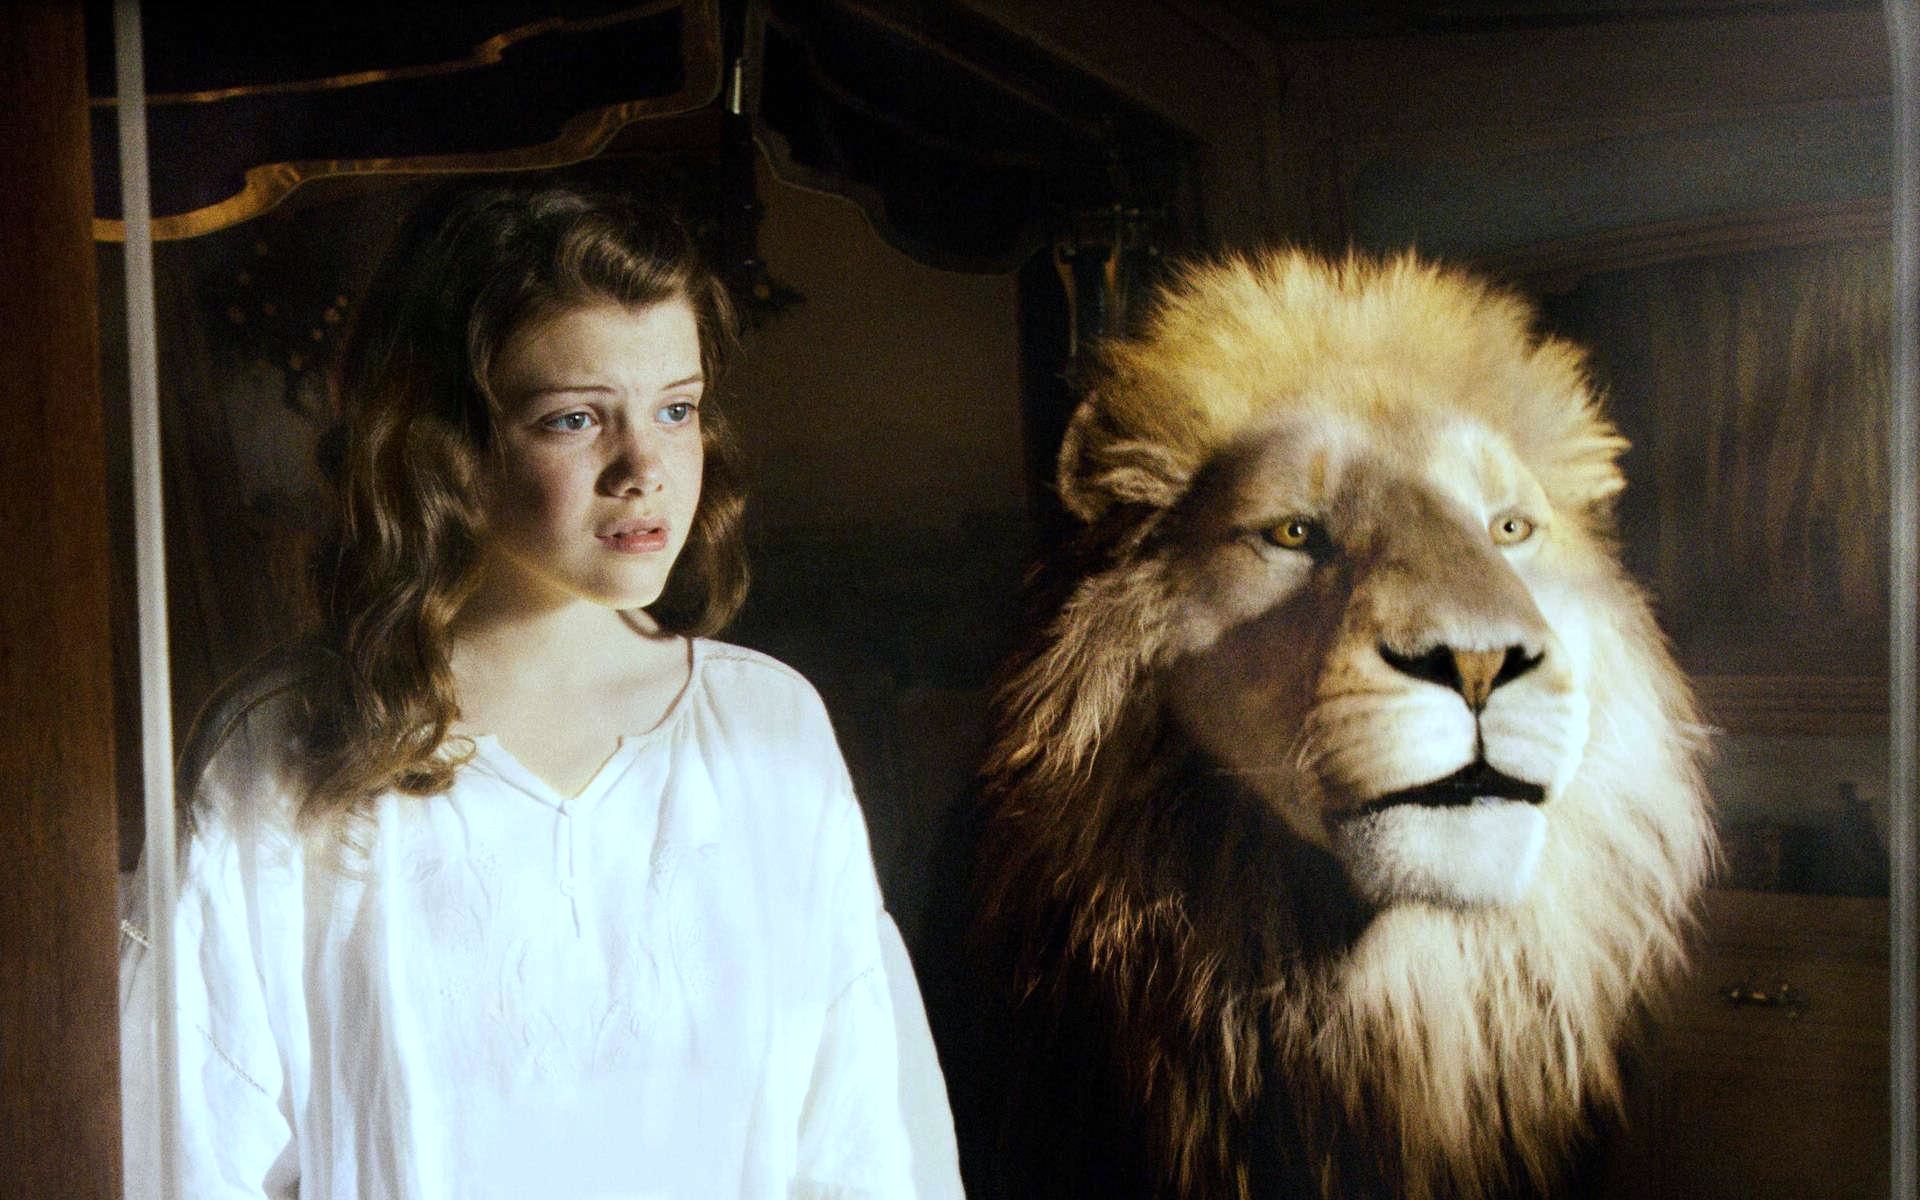 movie, the chronicles of narnia: the voyage of the dawn treader